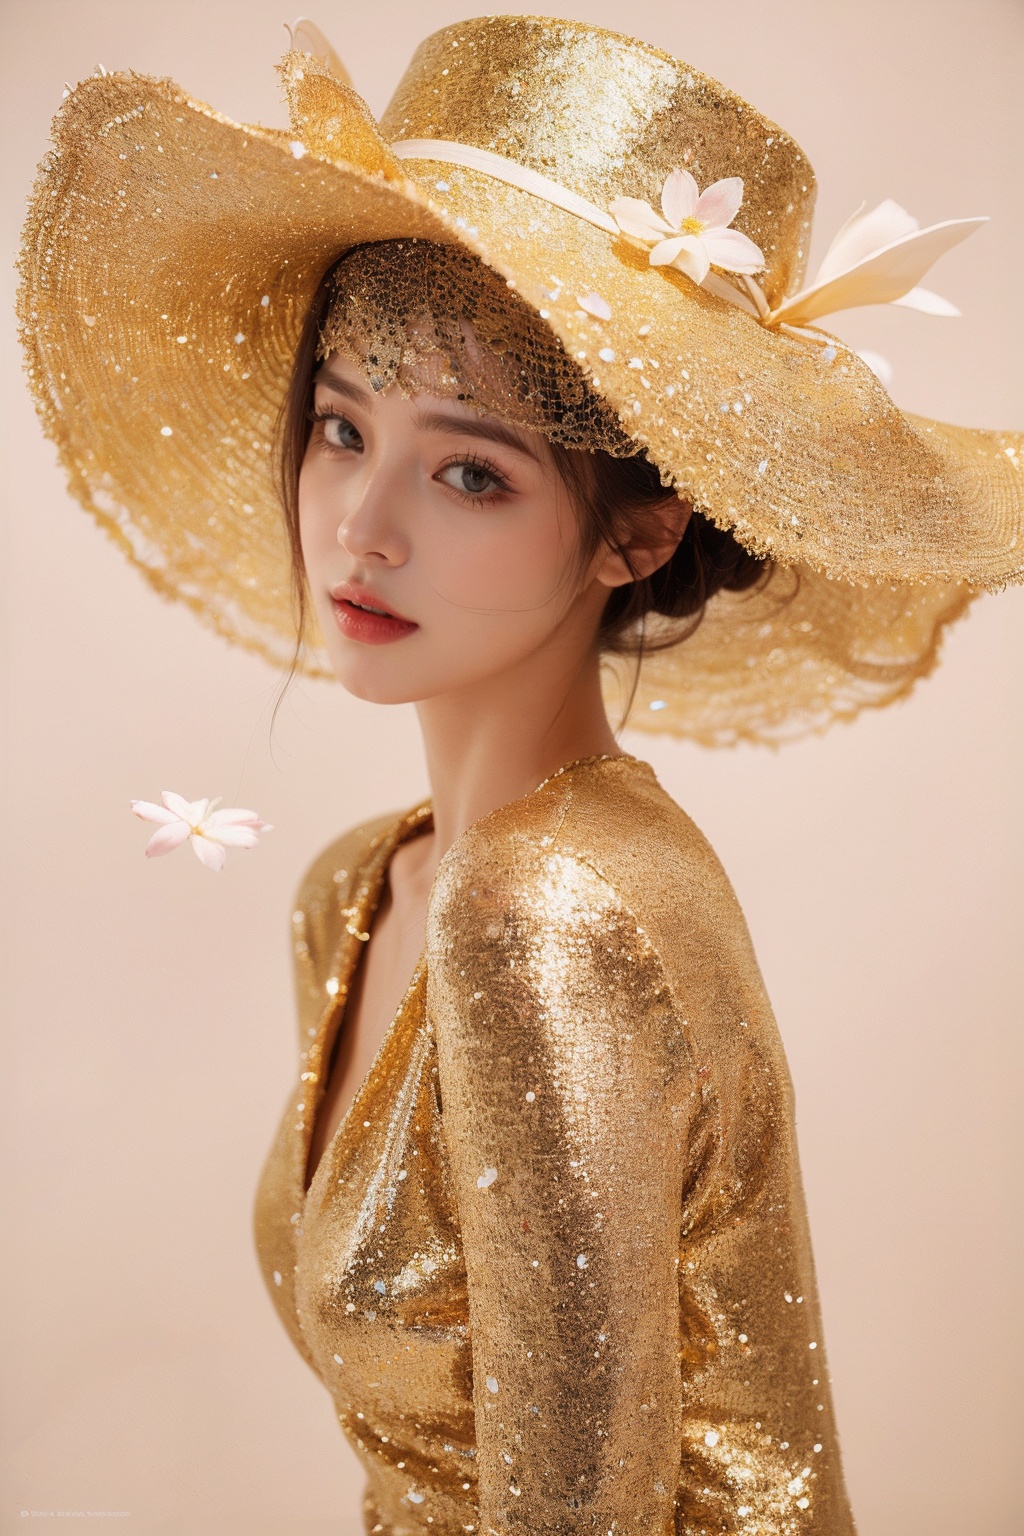 (1girl:1.1),stars in the eyes,(pure girl:1.1),(full body:0.6),There are many scattered luminous petals,contour deepening,white_background,cinematic angle,gold powder,<lora:jin_20231226224140-000003:0.7>, 